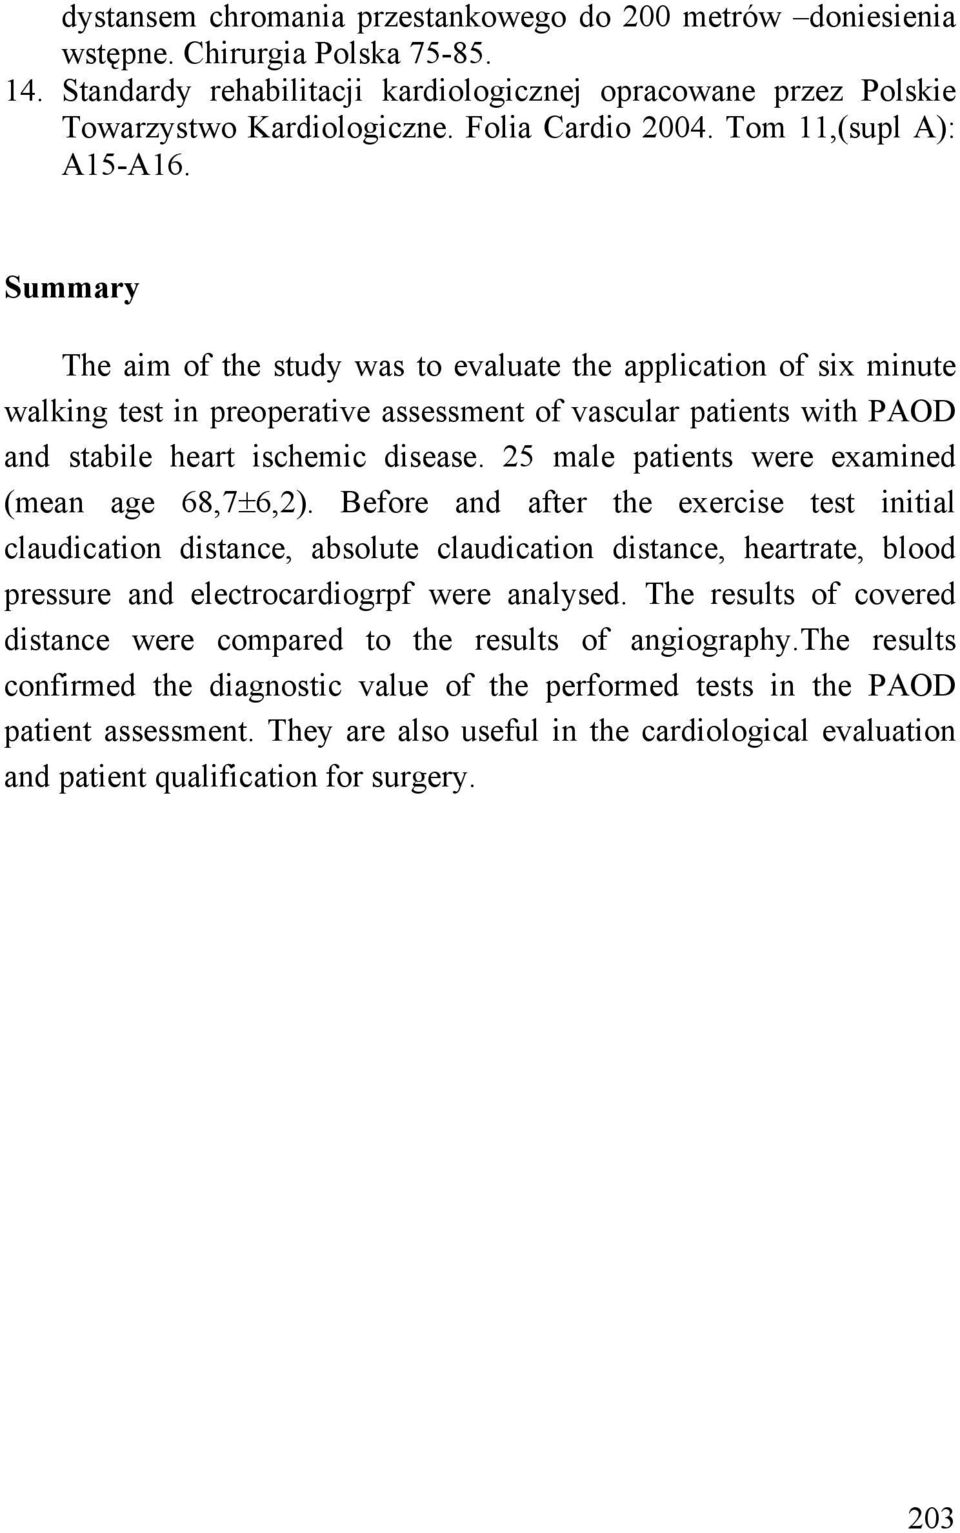 Summary The aim of the study was to evaluate the application of six minute walking test in preoperative assessment of vascular patients with PAOD and stabile heart ischemic disease.